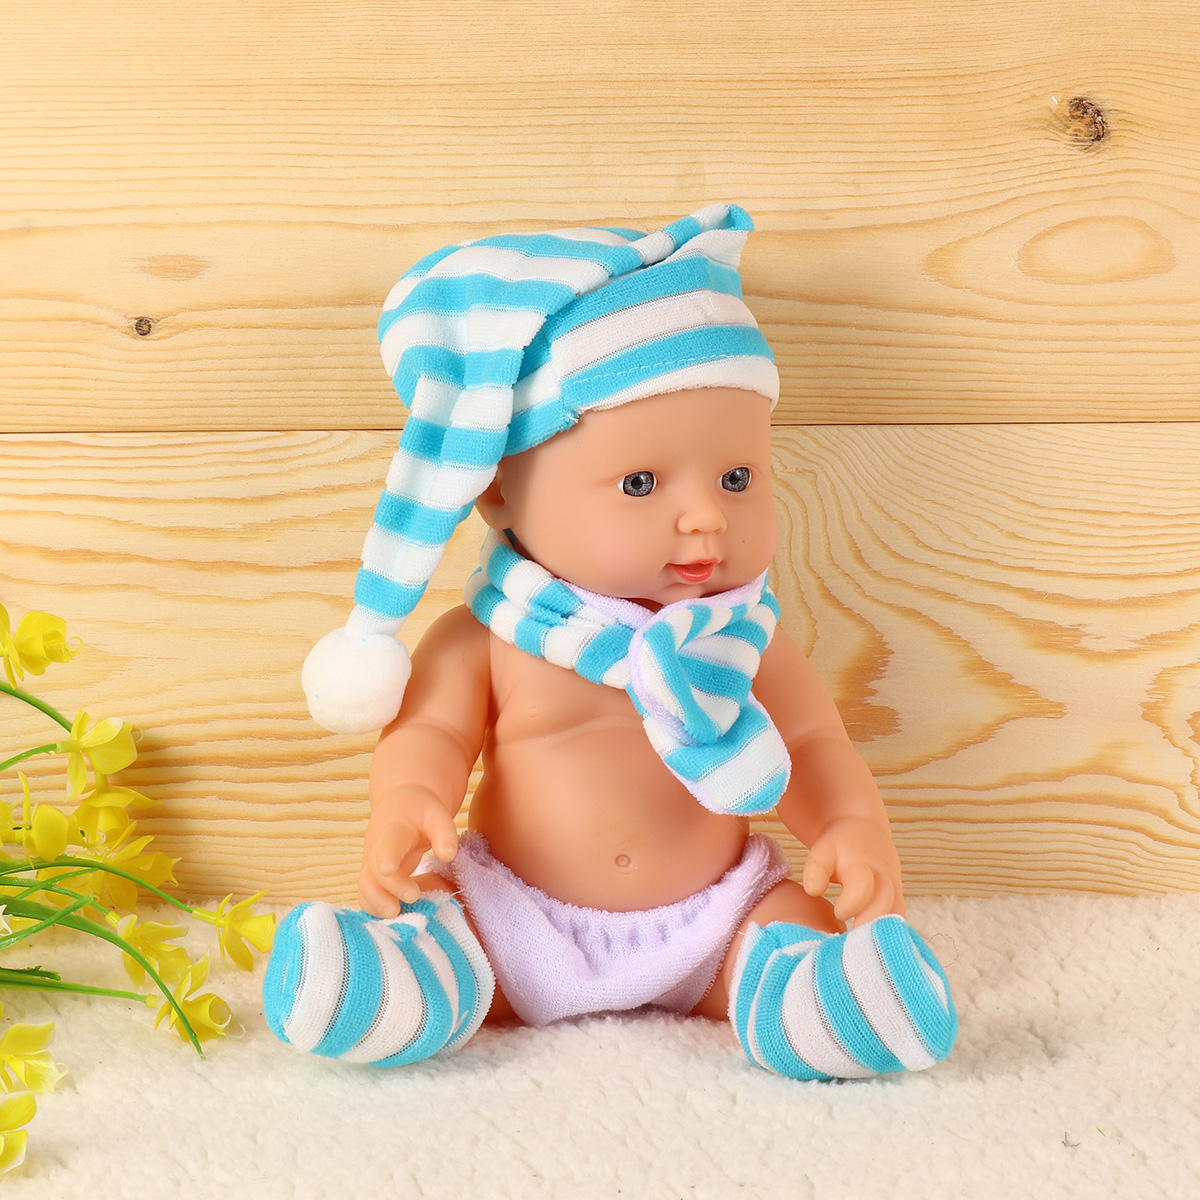 30CM-Height-Simulation-Soft-Silicone-Vinyl-Joint-Removable-Washable-Reborn-Baby-Doll-Toy-for-Kids-Bi-1812138-10